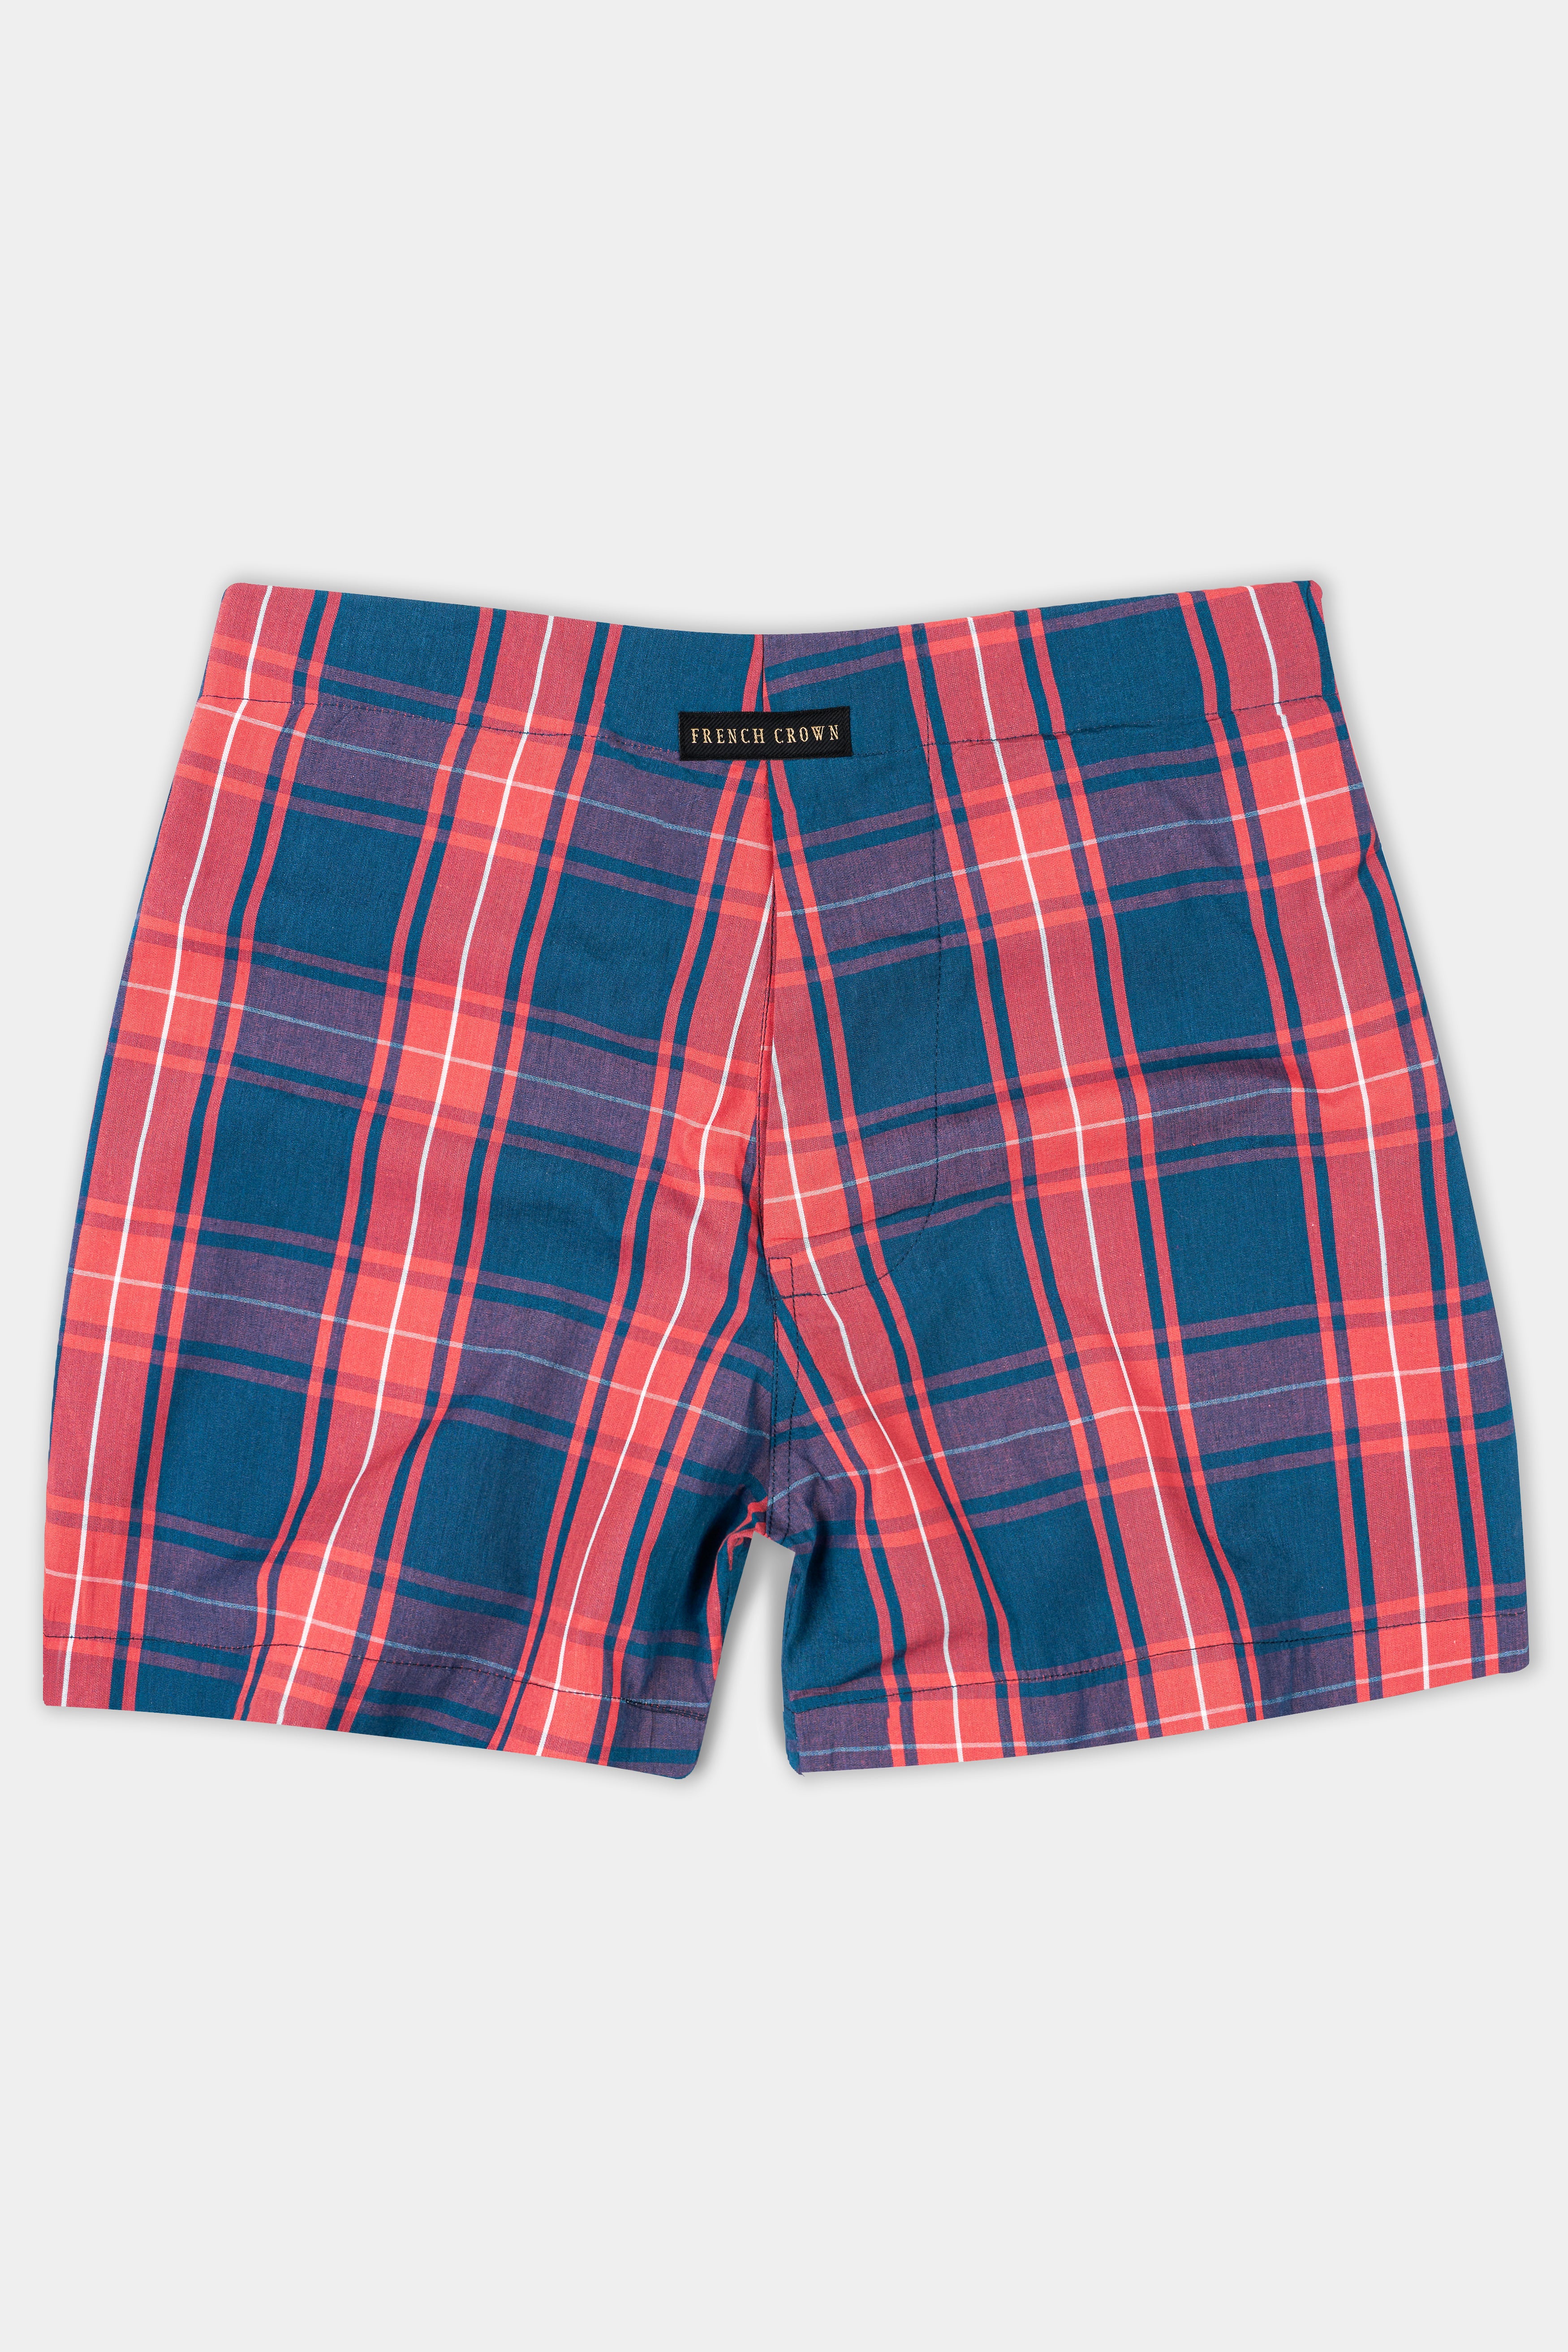 Chathams Blue And Airbnb Red Checkered Premium Cotton Boxer BX551-28, BX551-30, BX551-32, BX551-34, BX551-36, BX551-38, BX551-40, BX551-42, BX551-44